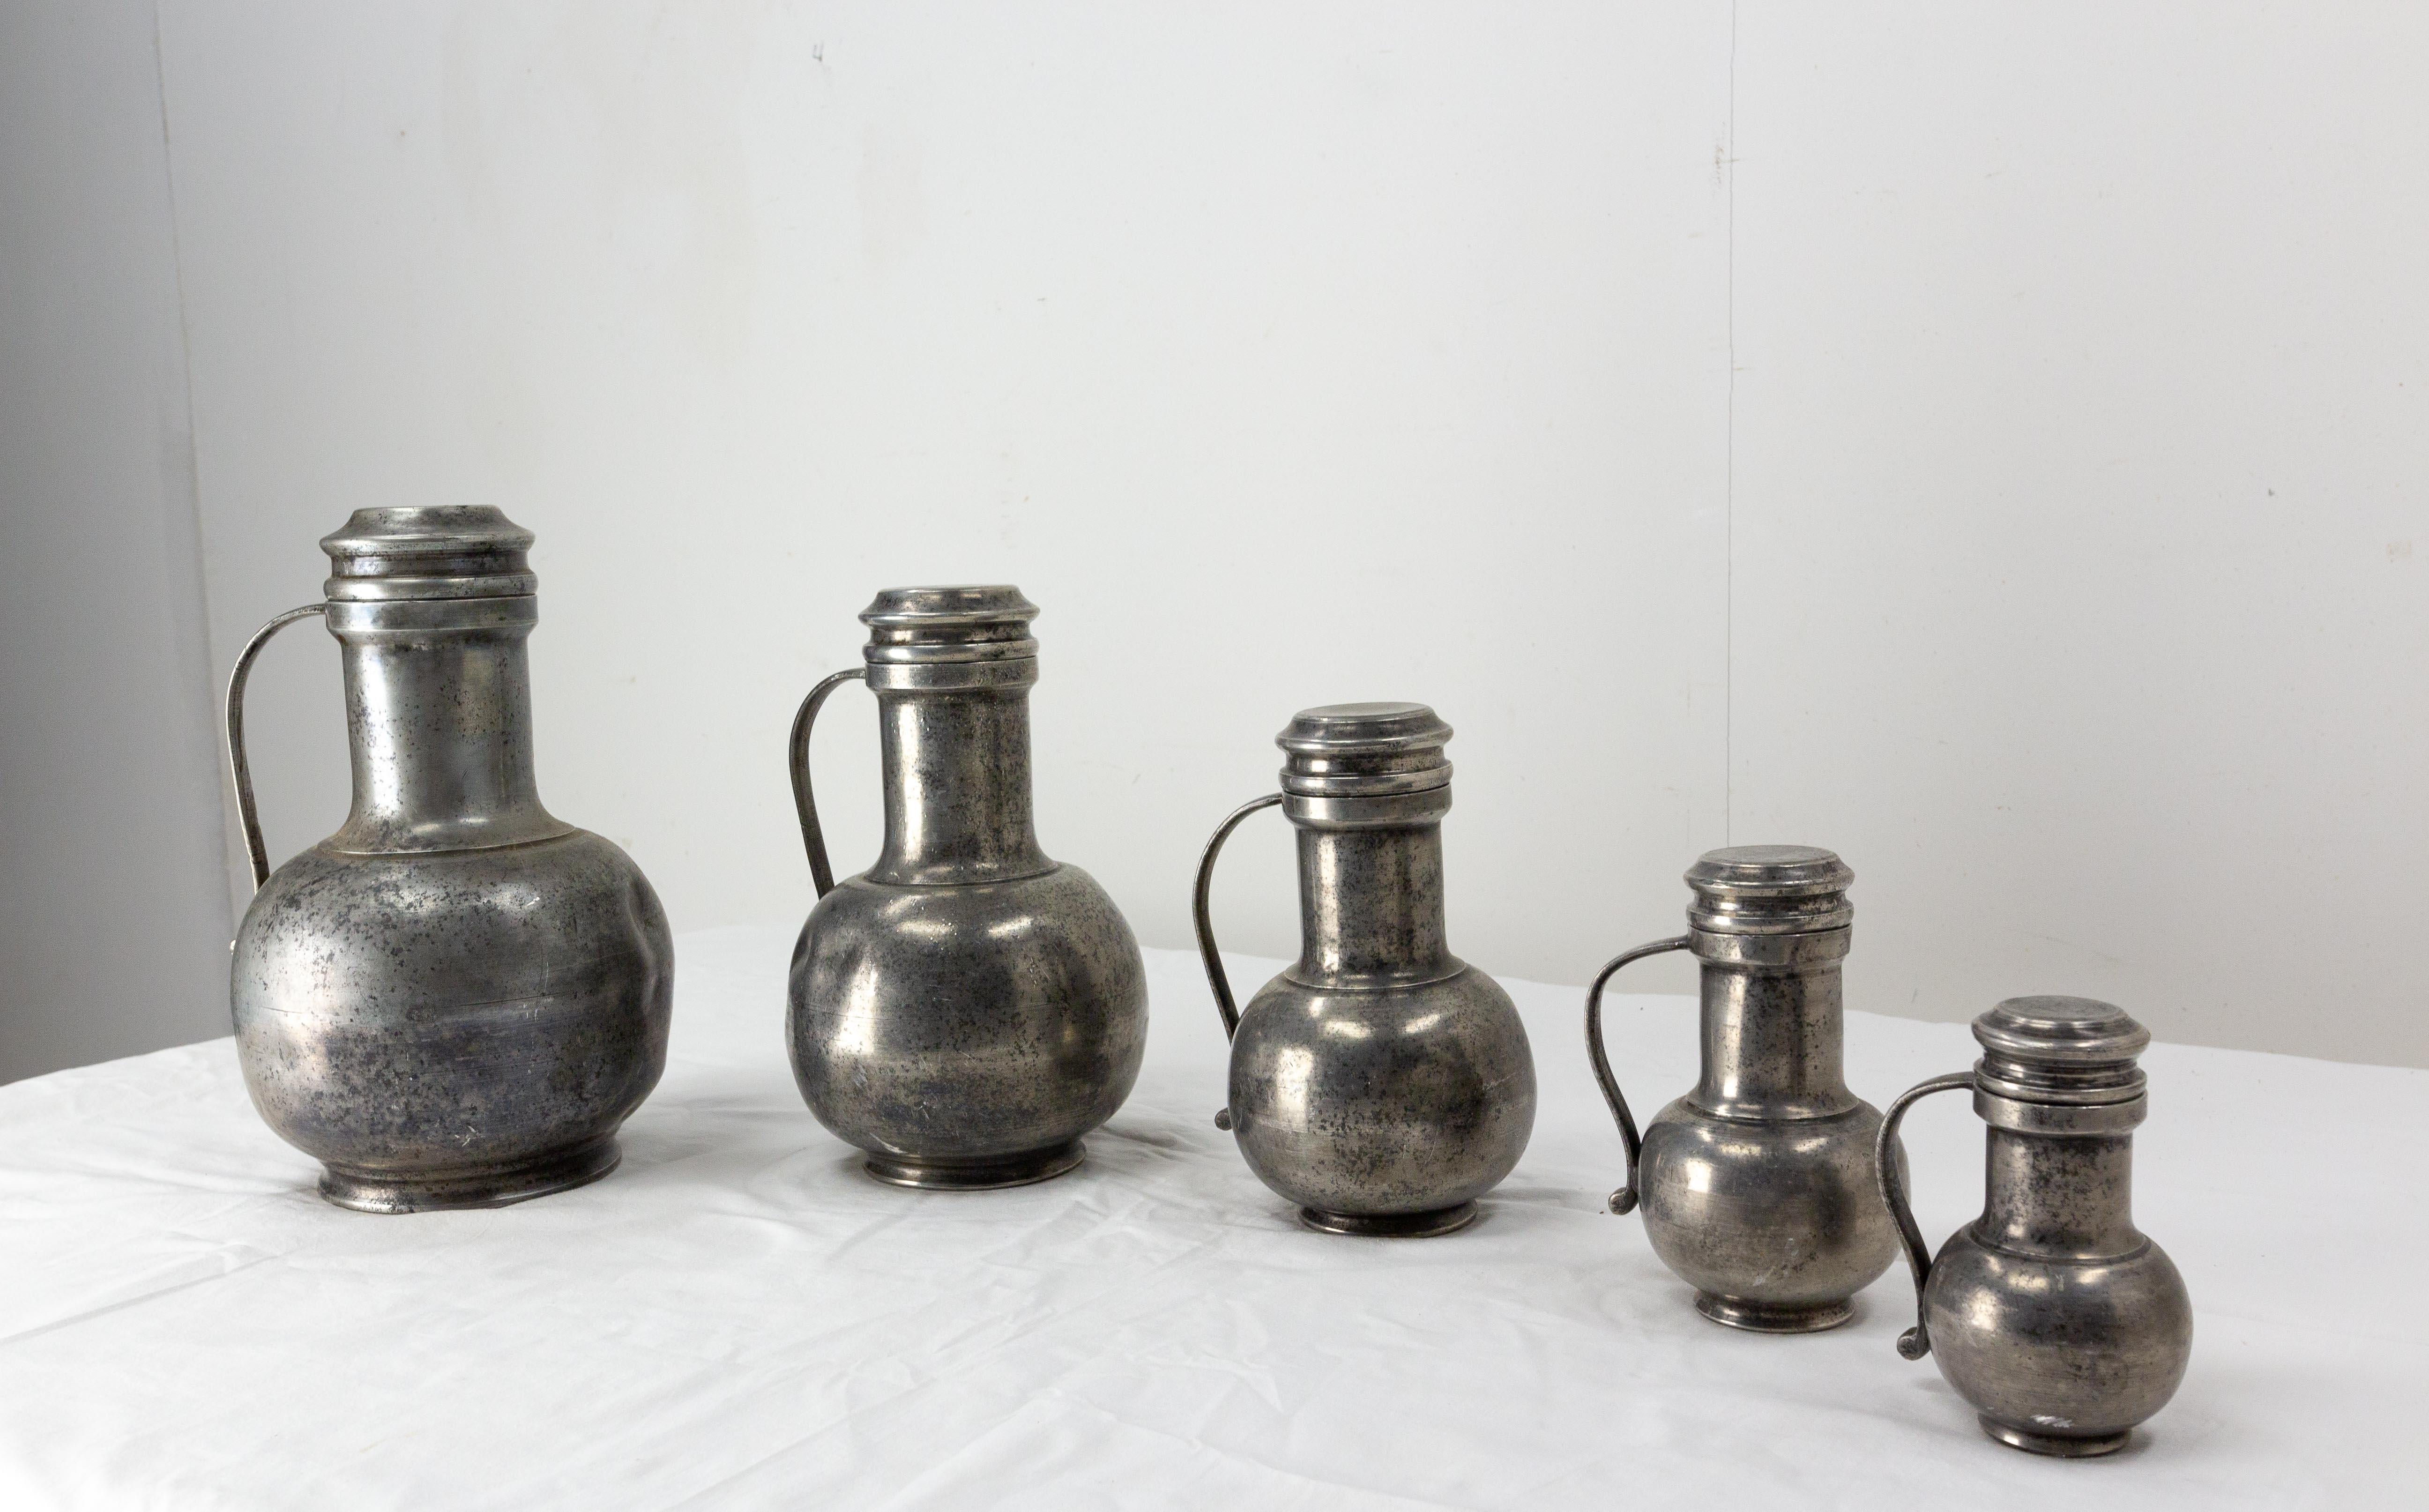 French series of tin Pitchers
late 18th century
Dimension of the biggest pitcher: diam: 7.87, height: 13.19 in. (20 x 33.5 cm)
Dimension of the smallest pitcher: diam: 3.15, height: 5.91 in. (8 x 15 cm)
Good condition

Shipping:
L35 P35 H34